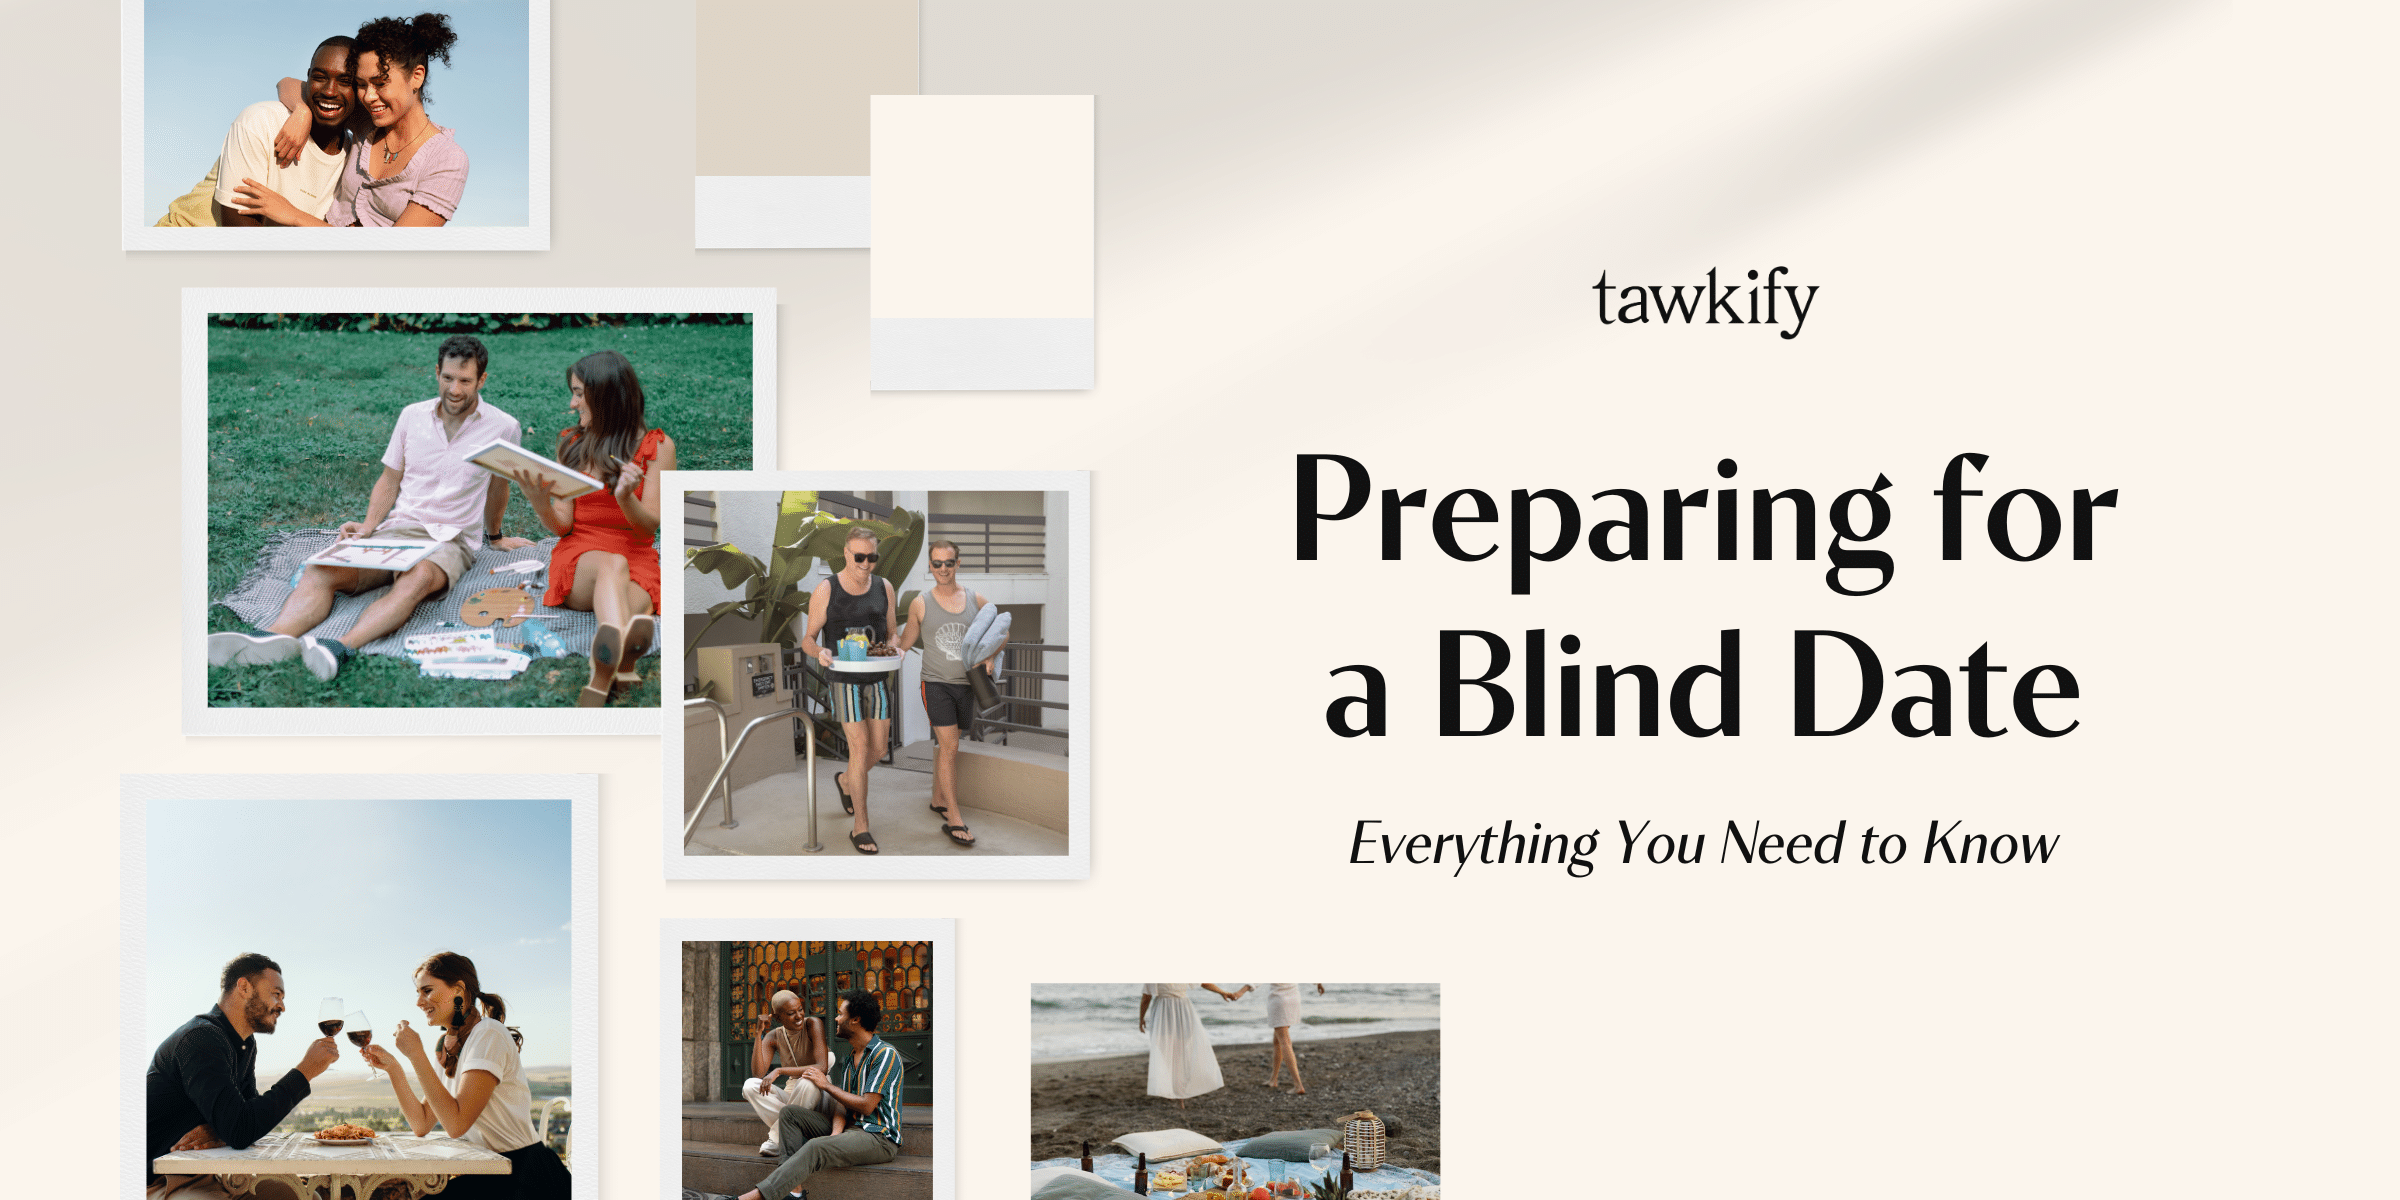 Get ready to turn nerves into excitement with our essential guide on preparing for a blind date, and step into your next romantic adventure with confidence!